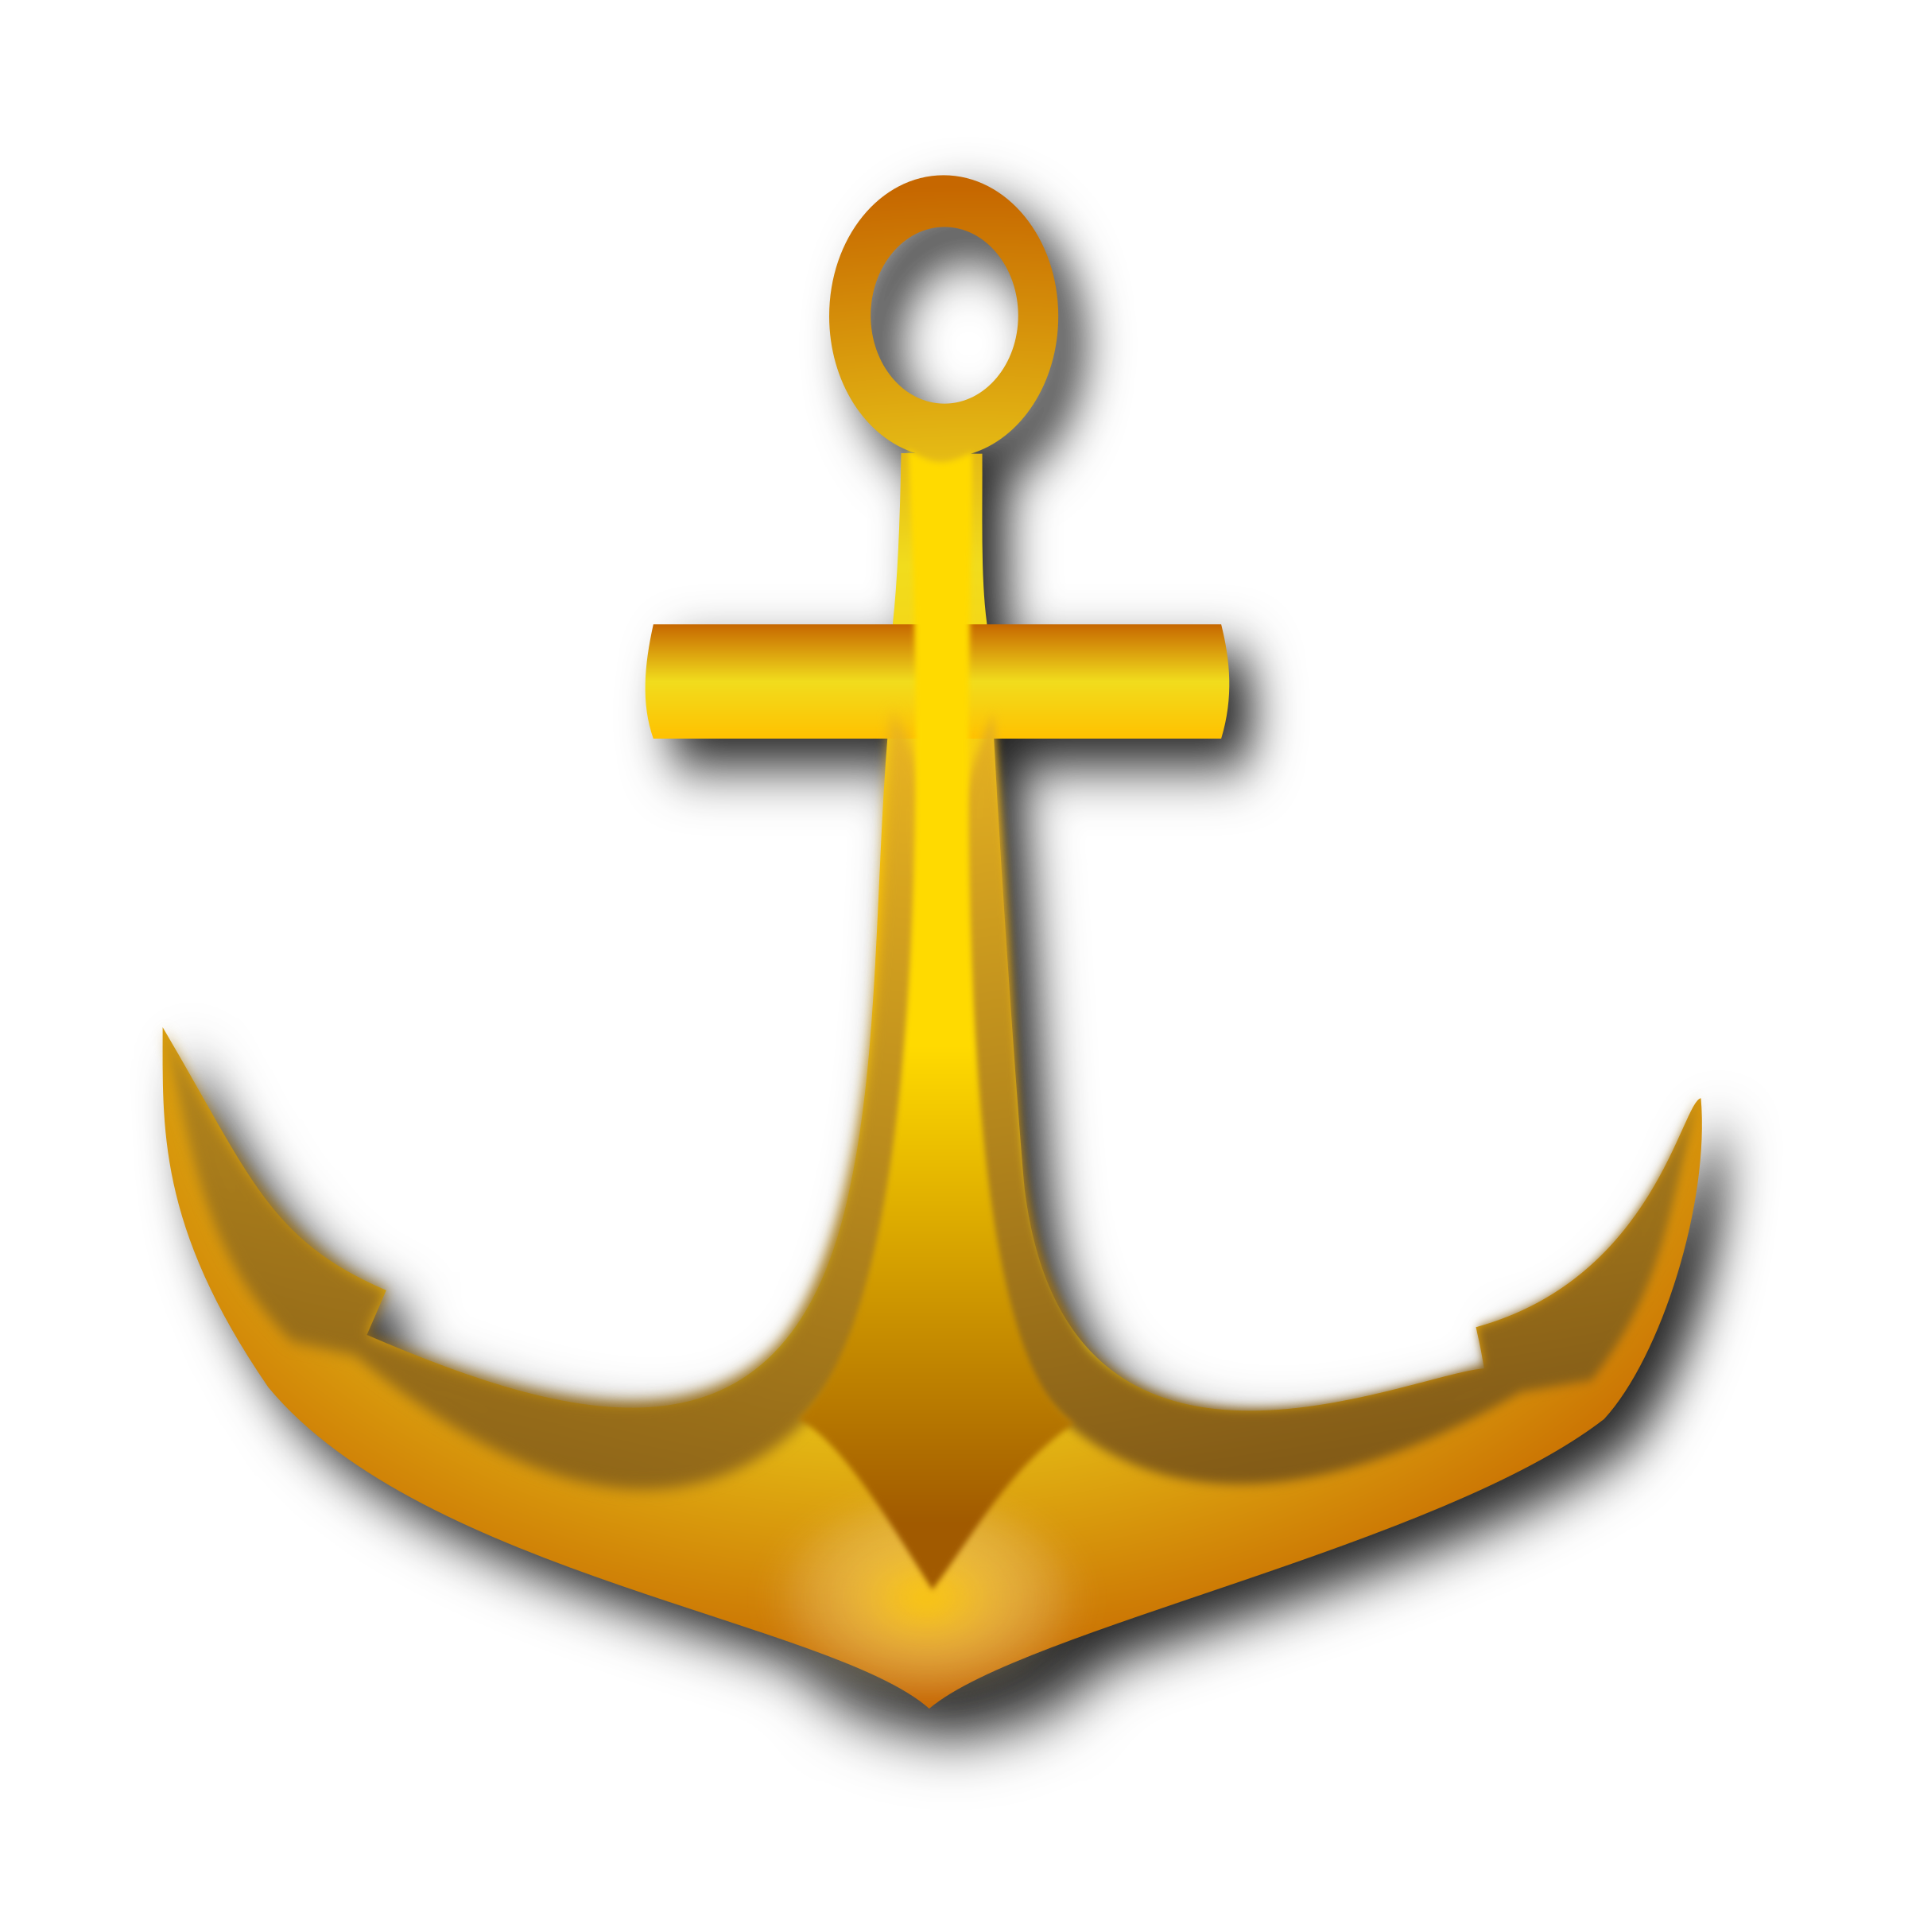 Girly clipart anchor. Golden big image png